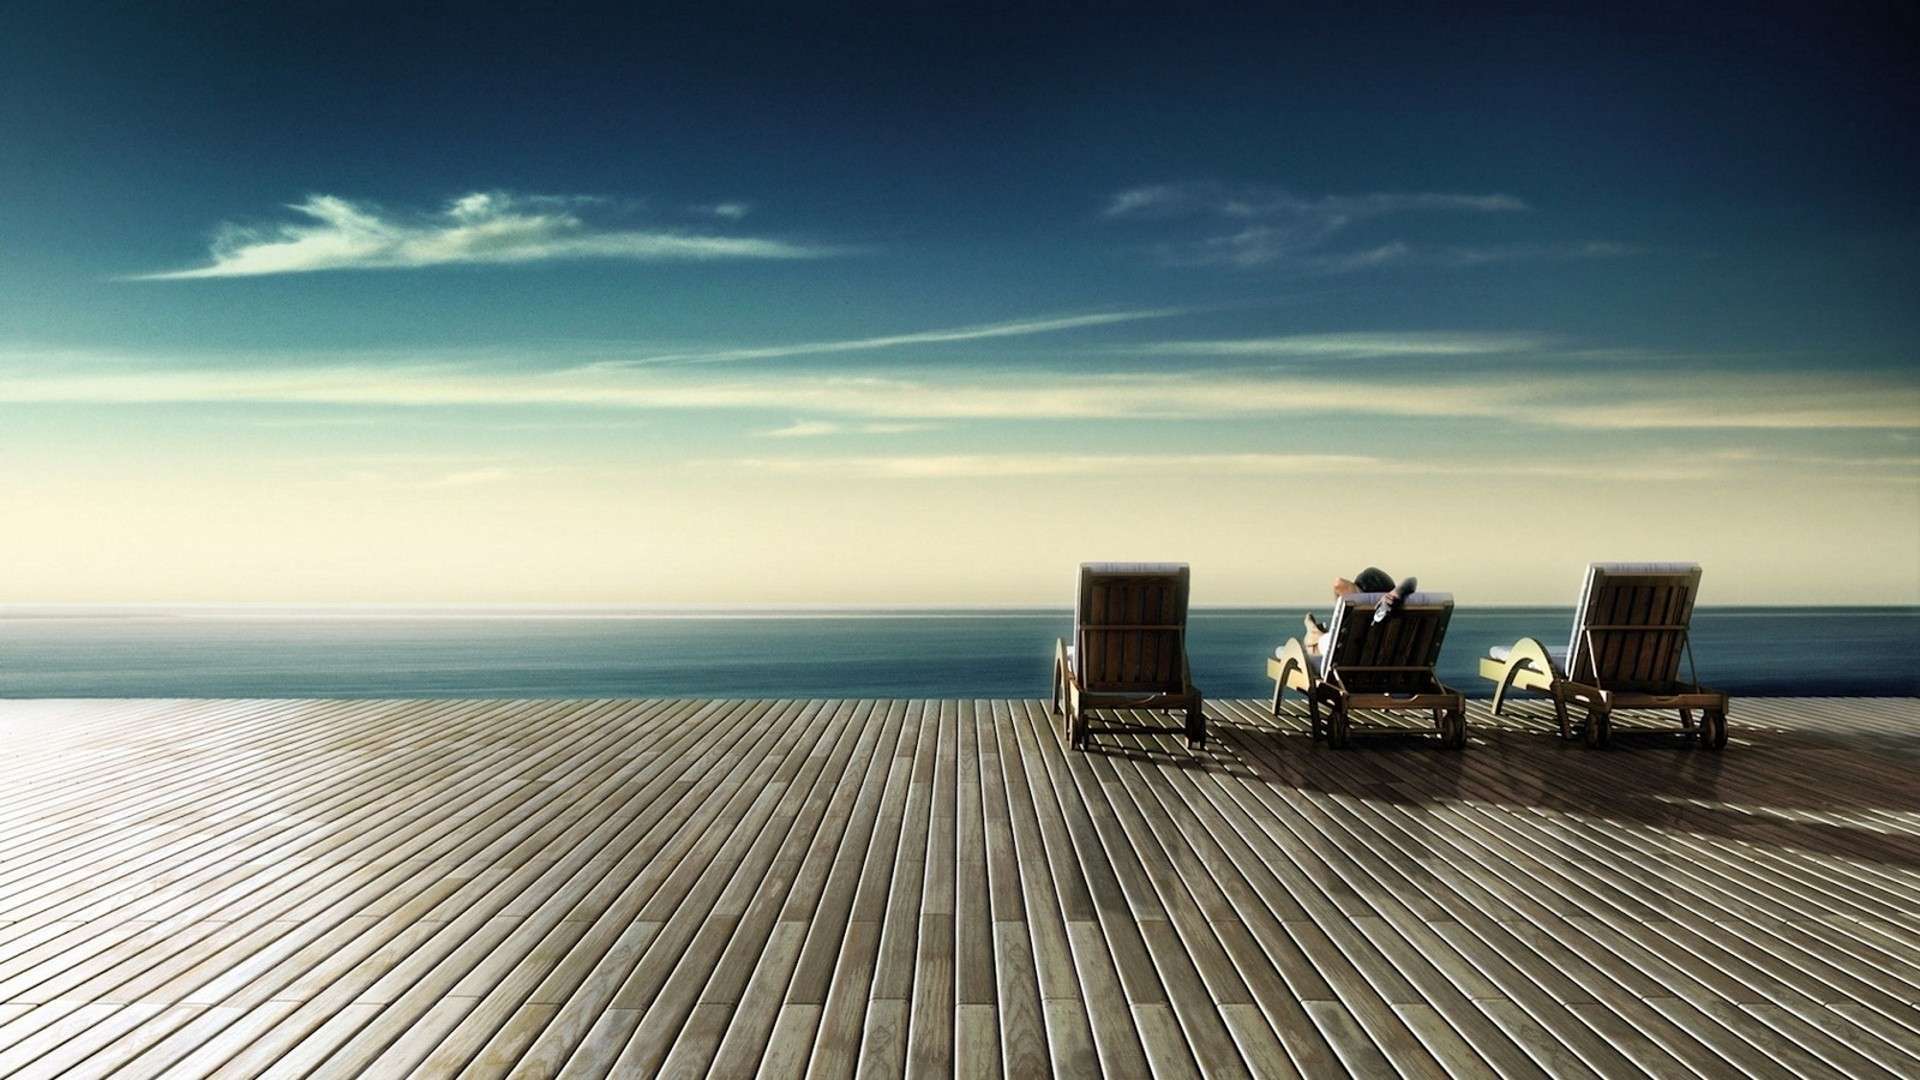 View from the Deck HD Wallpaper FullHDWpp   Full HD Wallpapers